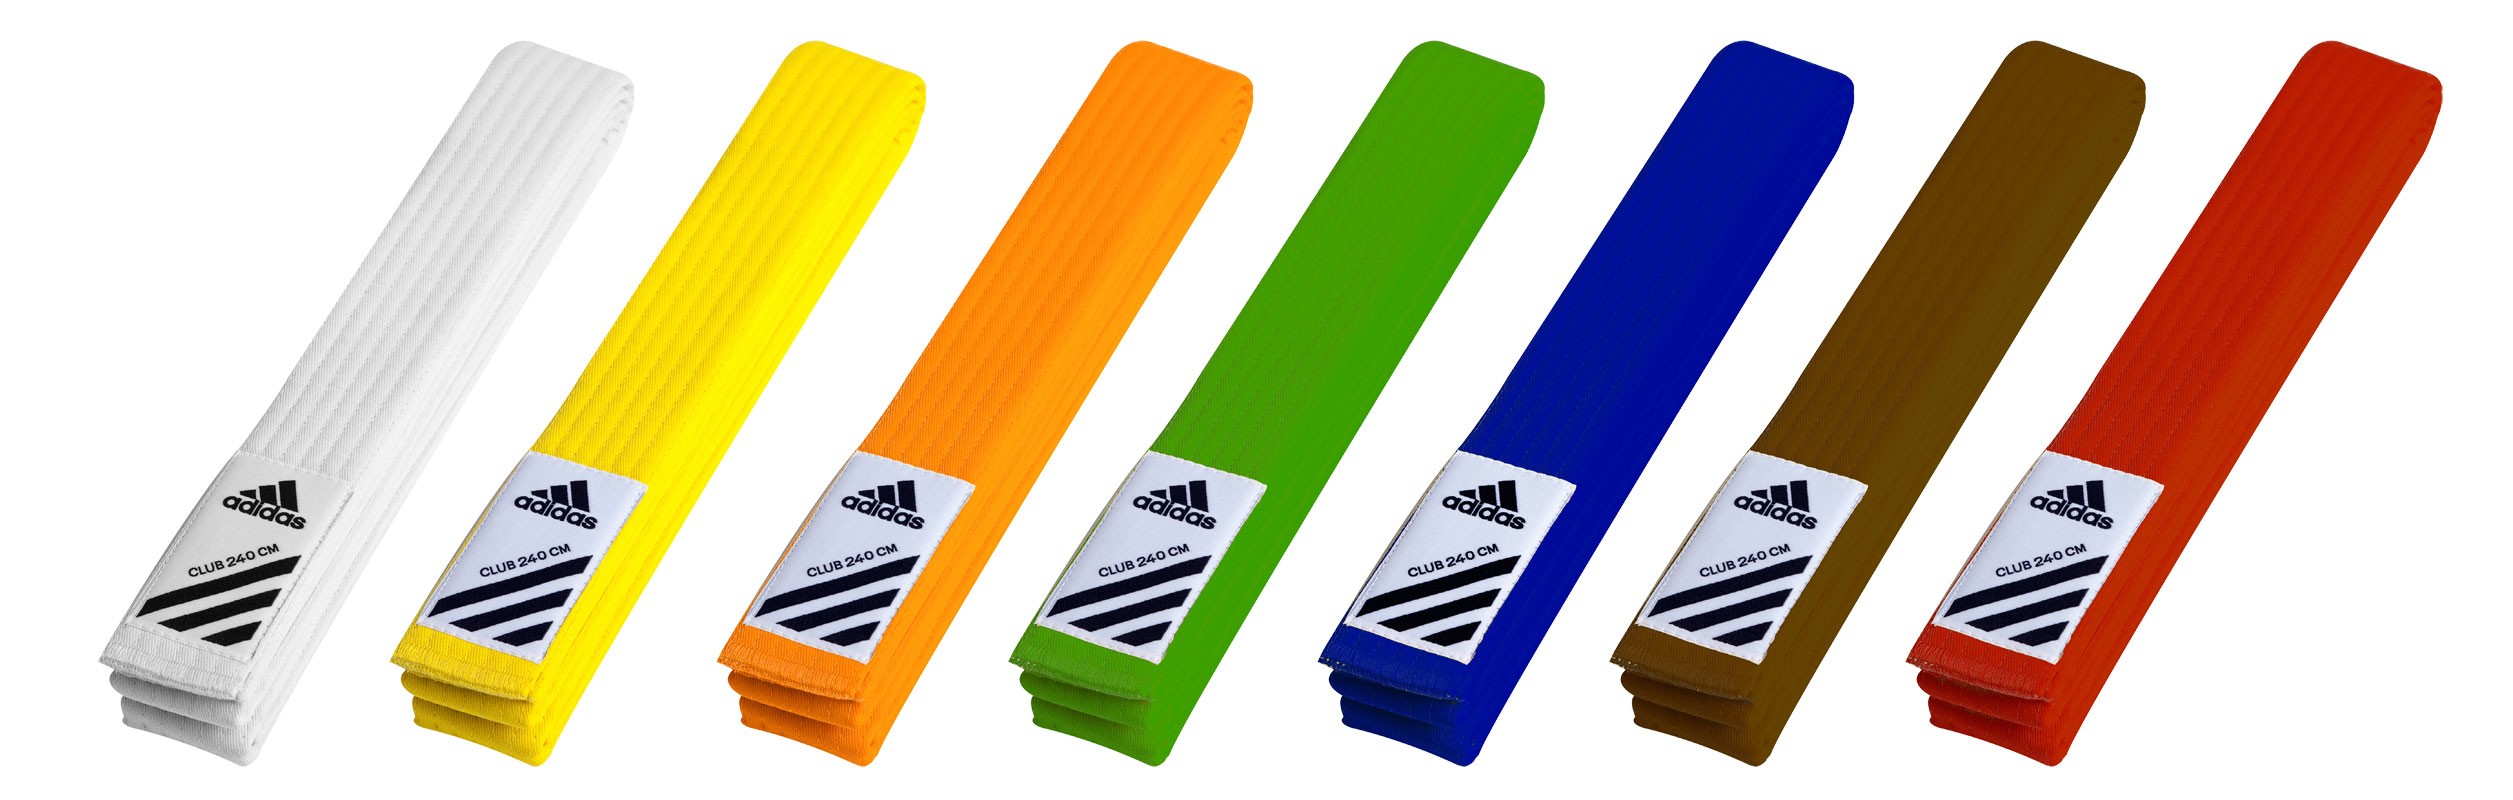 Adidas belts for martial arts.